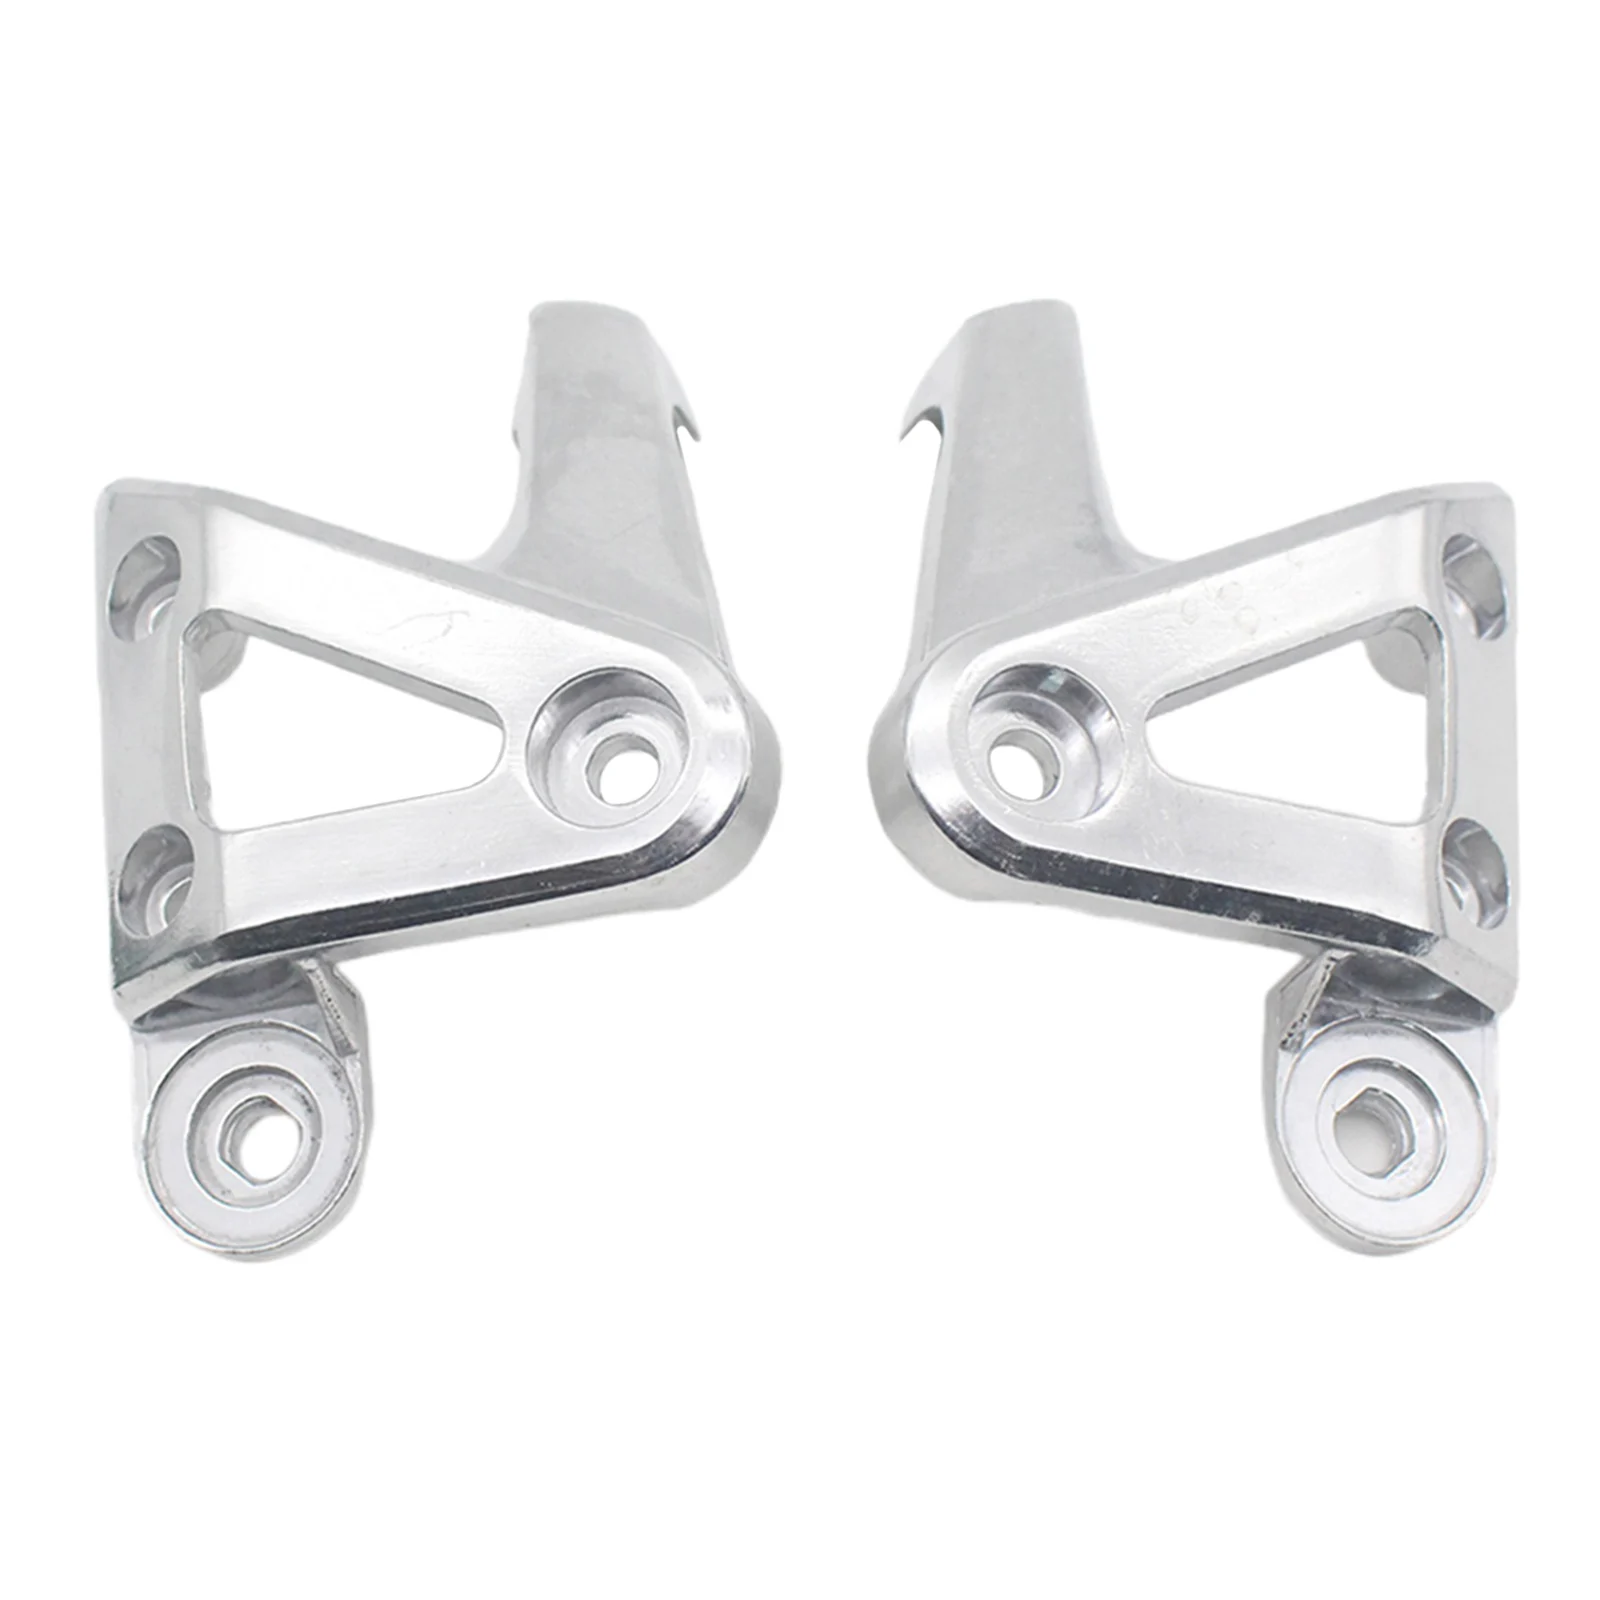 1 Set Motorcycles Headlight Mount Holders For Honda CB400 VTEC 1/2/3 1999-2008 Motorcycle Replacement Parts Accessories